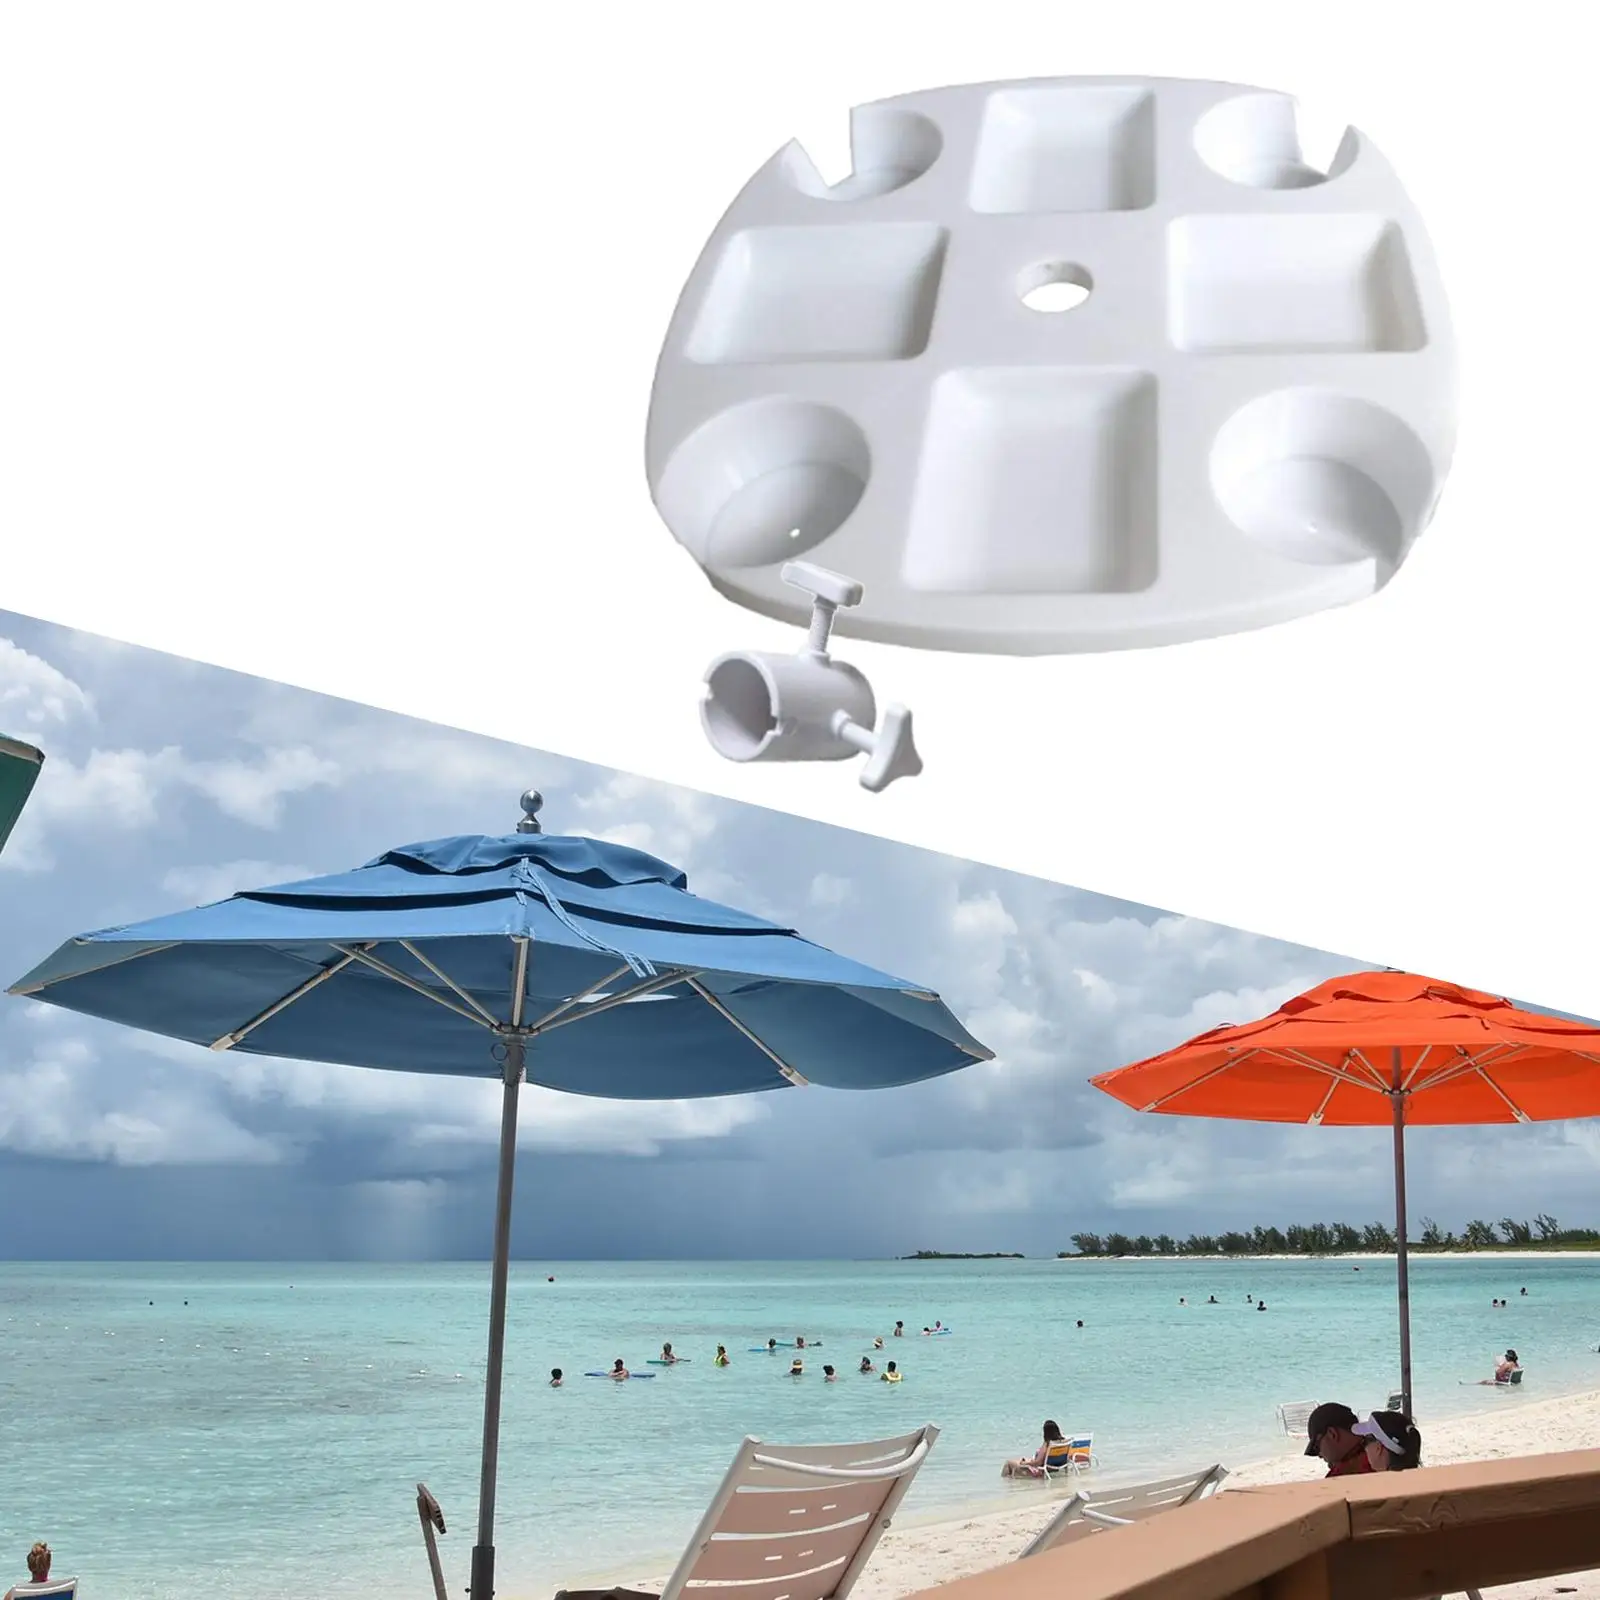 Outdoor Beach Umbrella  4 Snack Compartments Multifunctional Item Storage Tray Cup Holders 